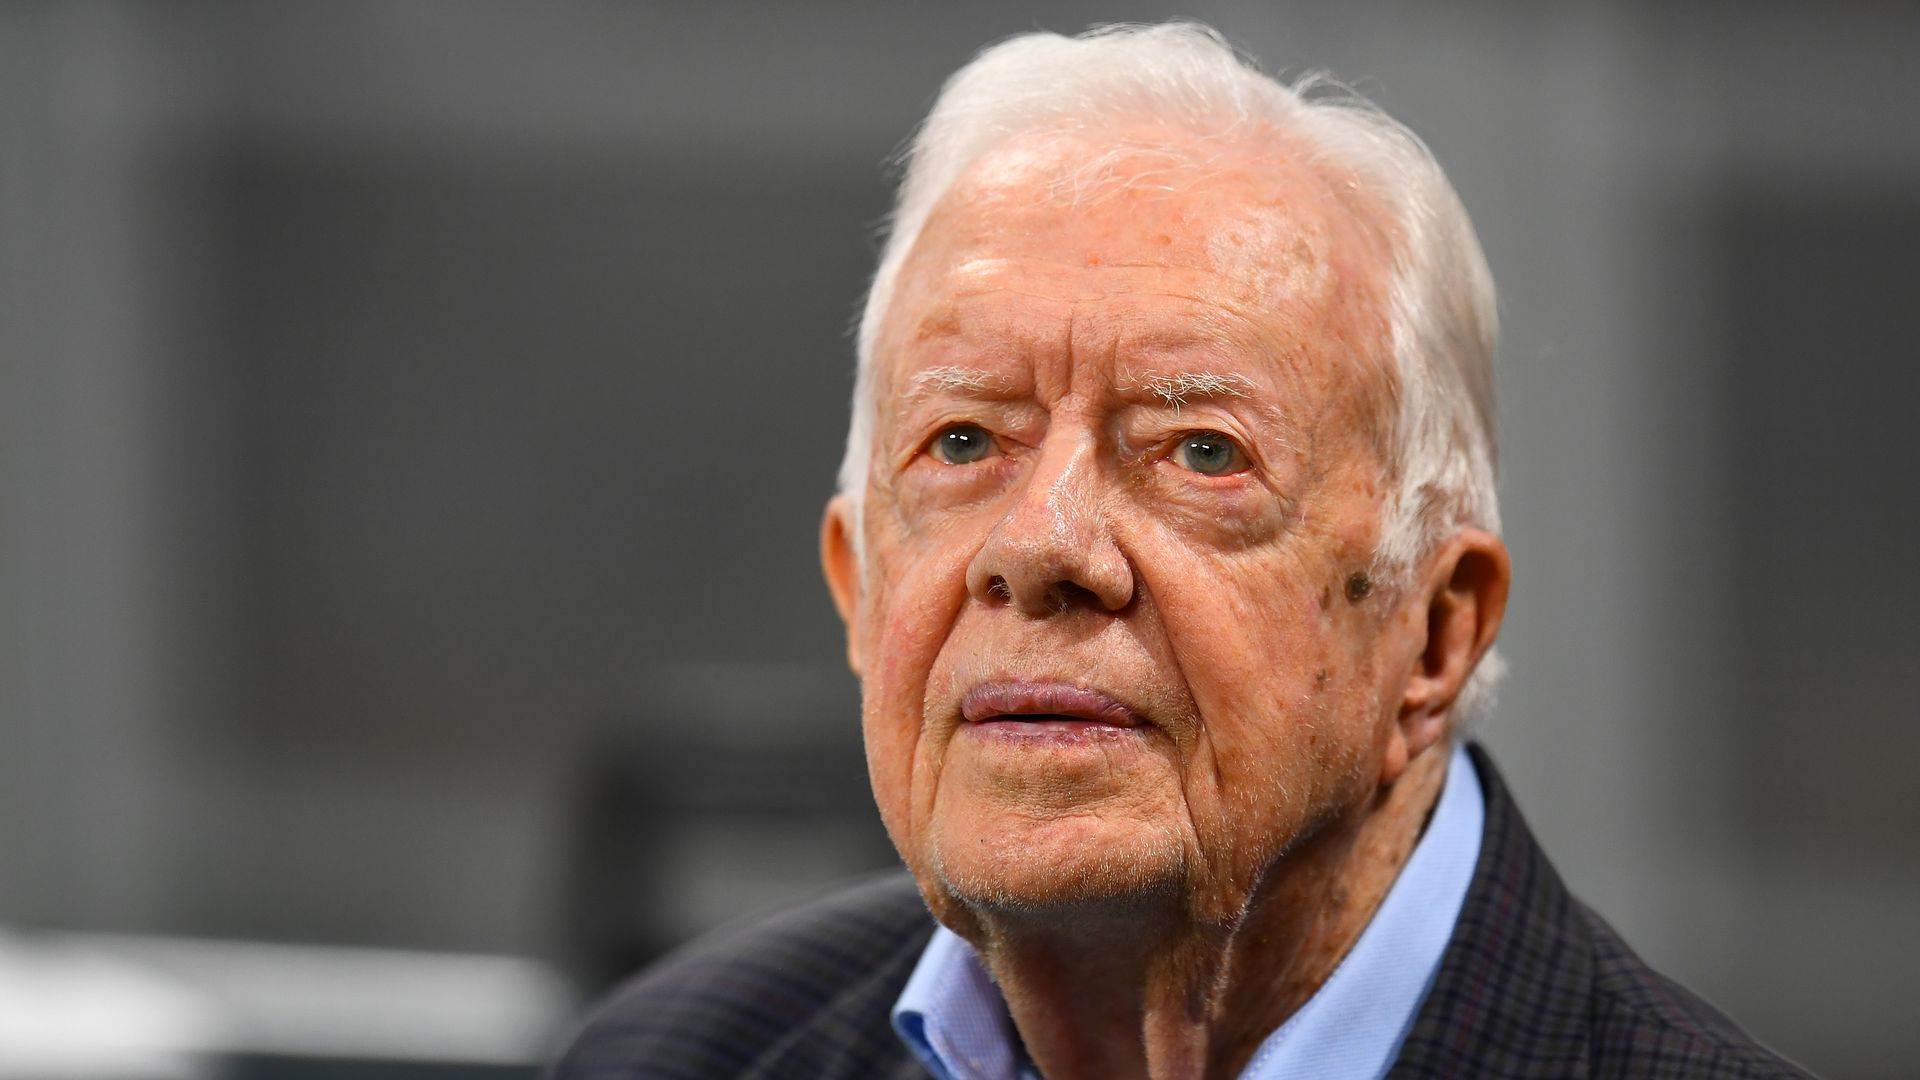 Photo of Jimmy Carter's face